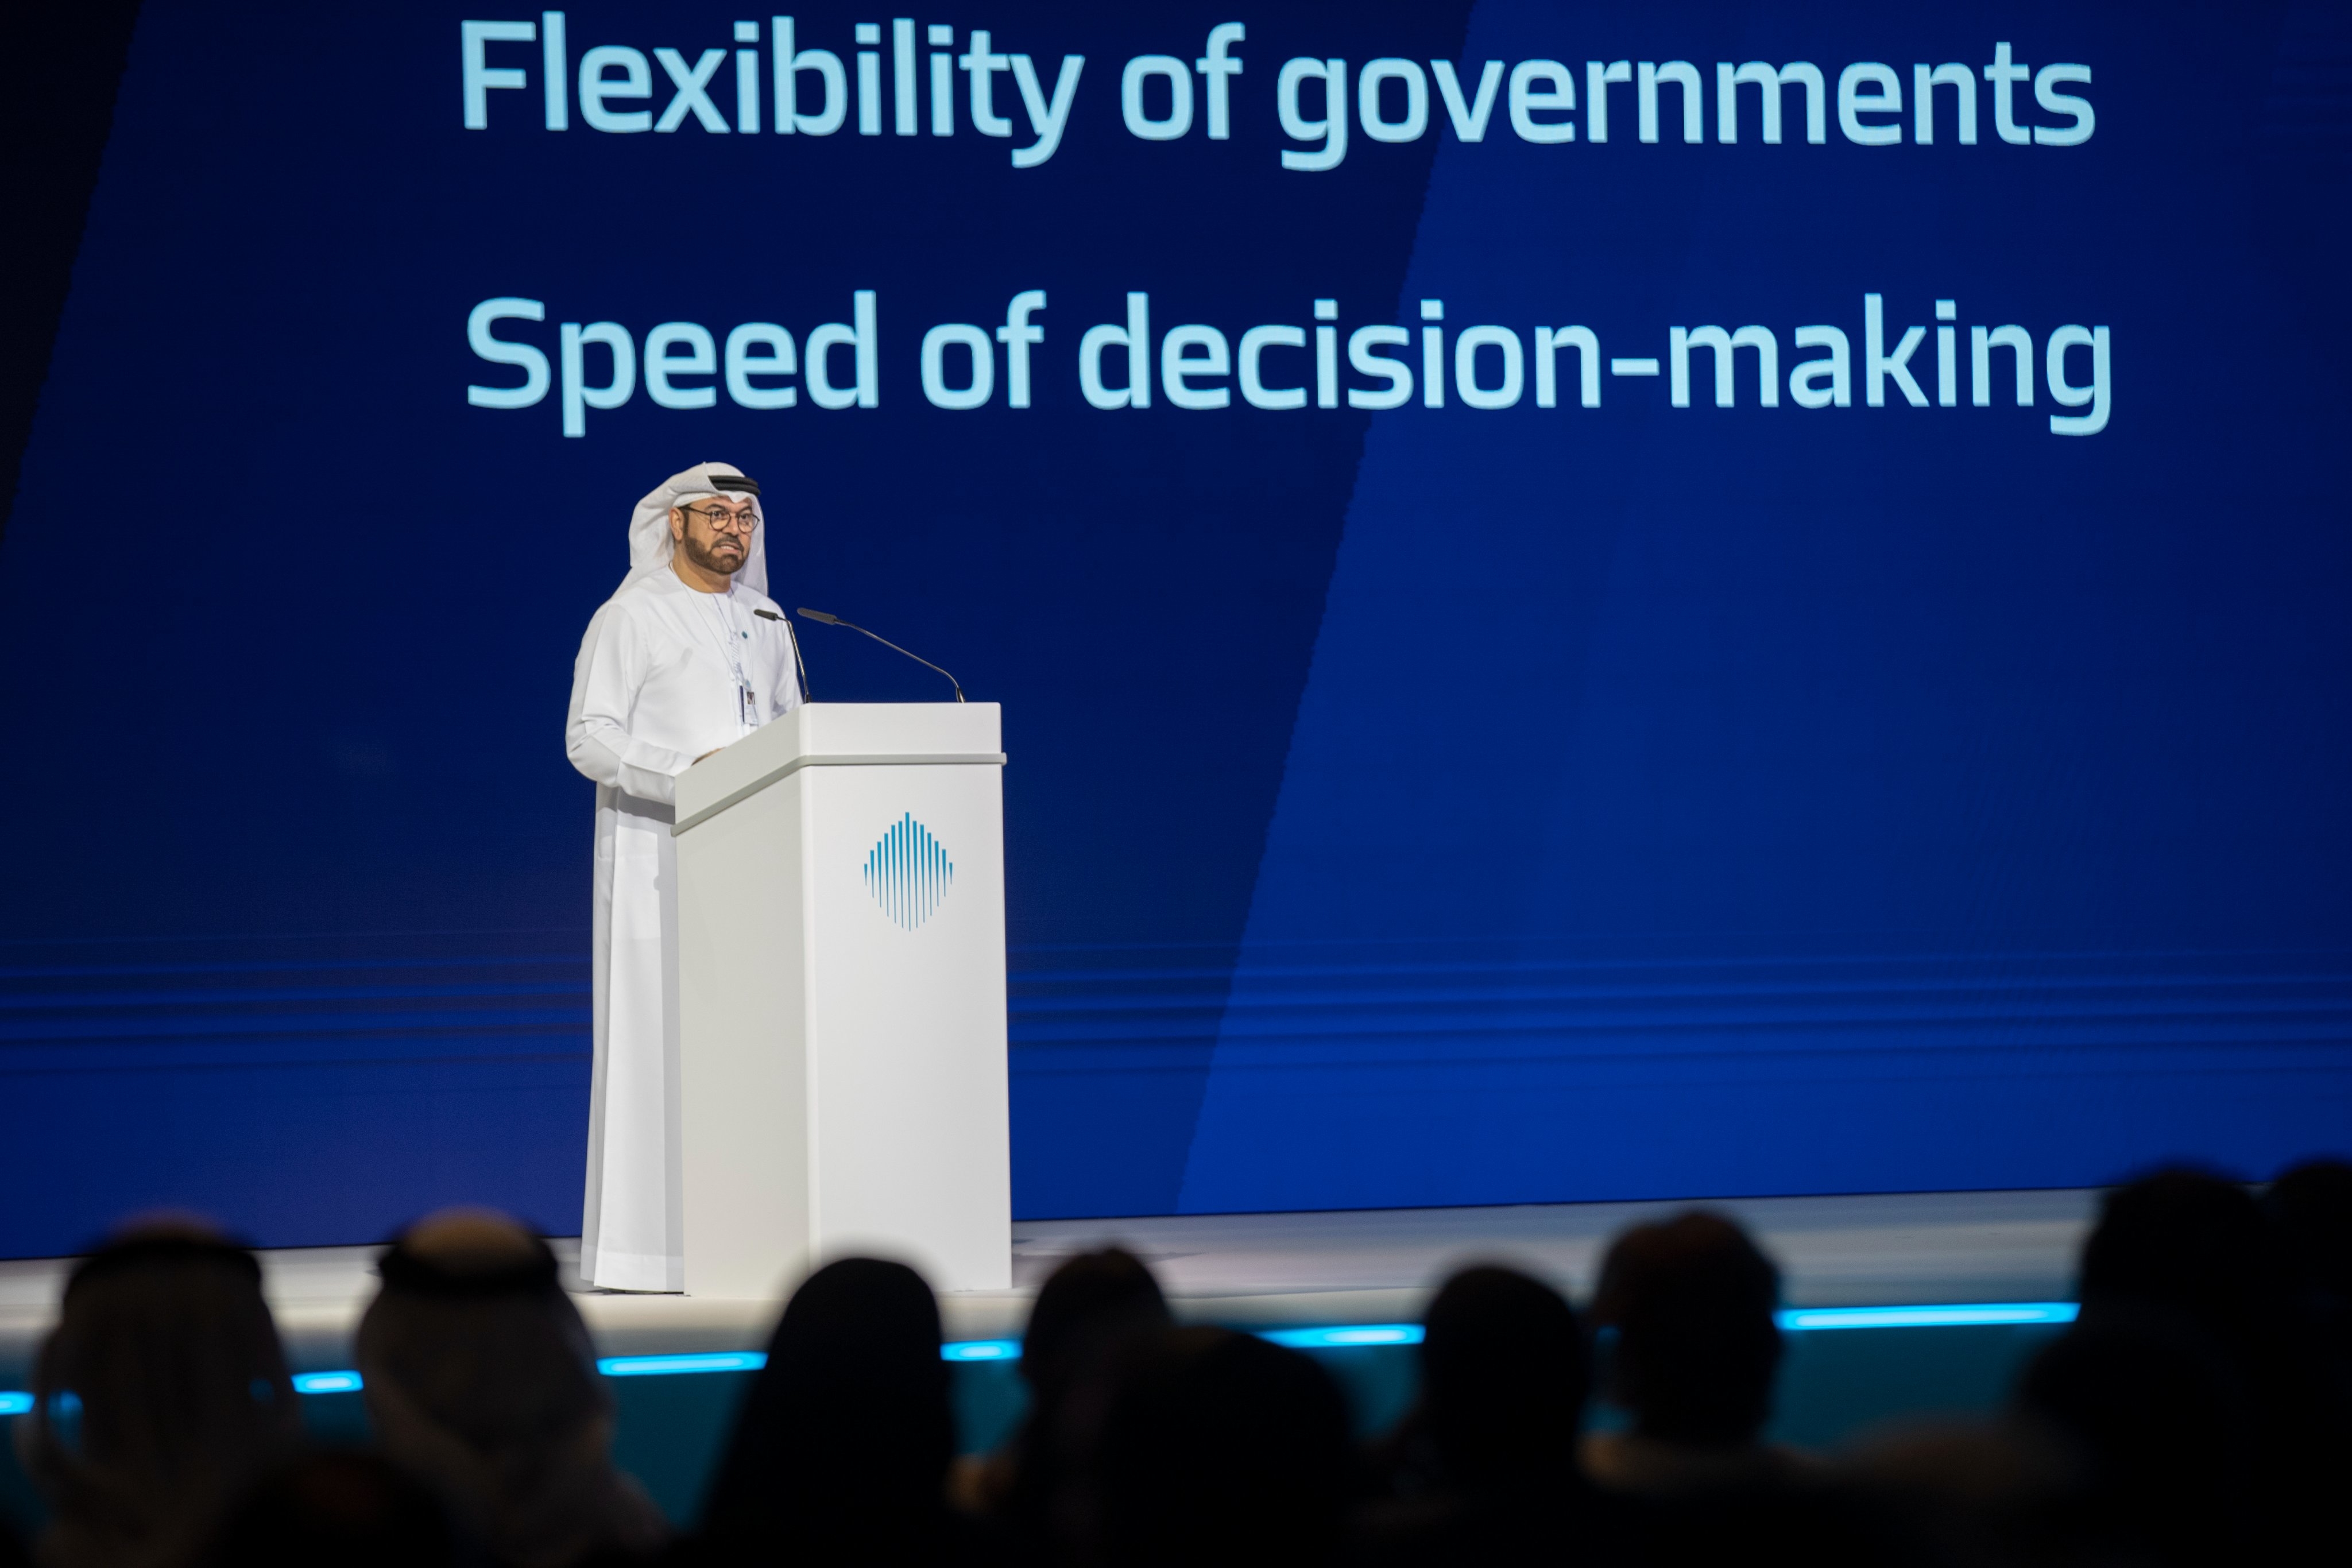 World is facing unprecedented speed of change, Governments’ are being tested: Mohammad Al Gergawi